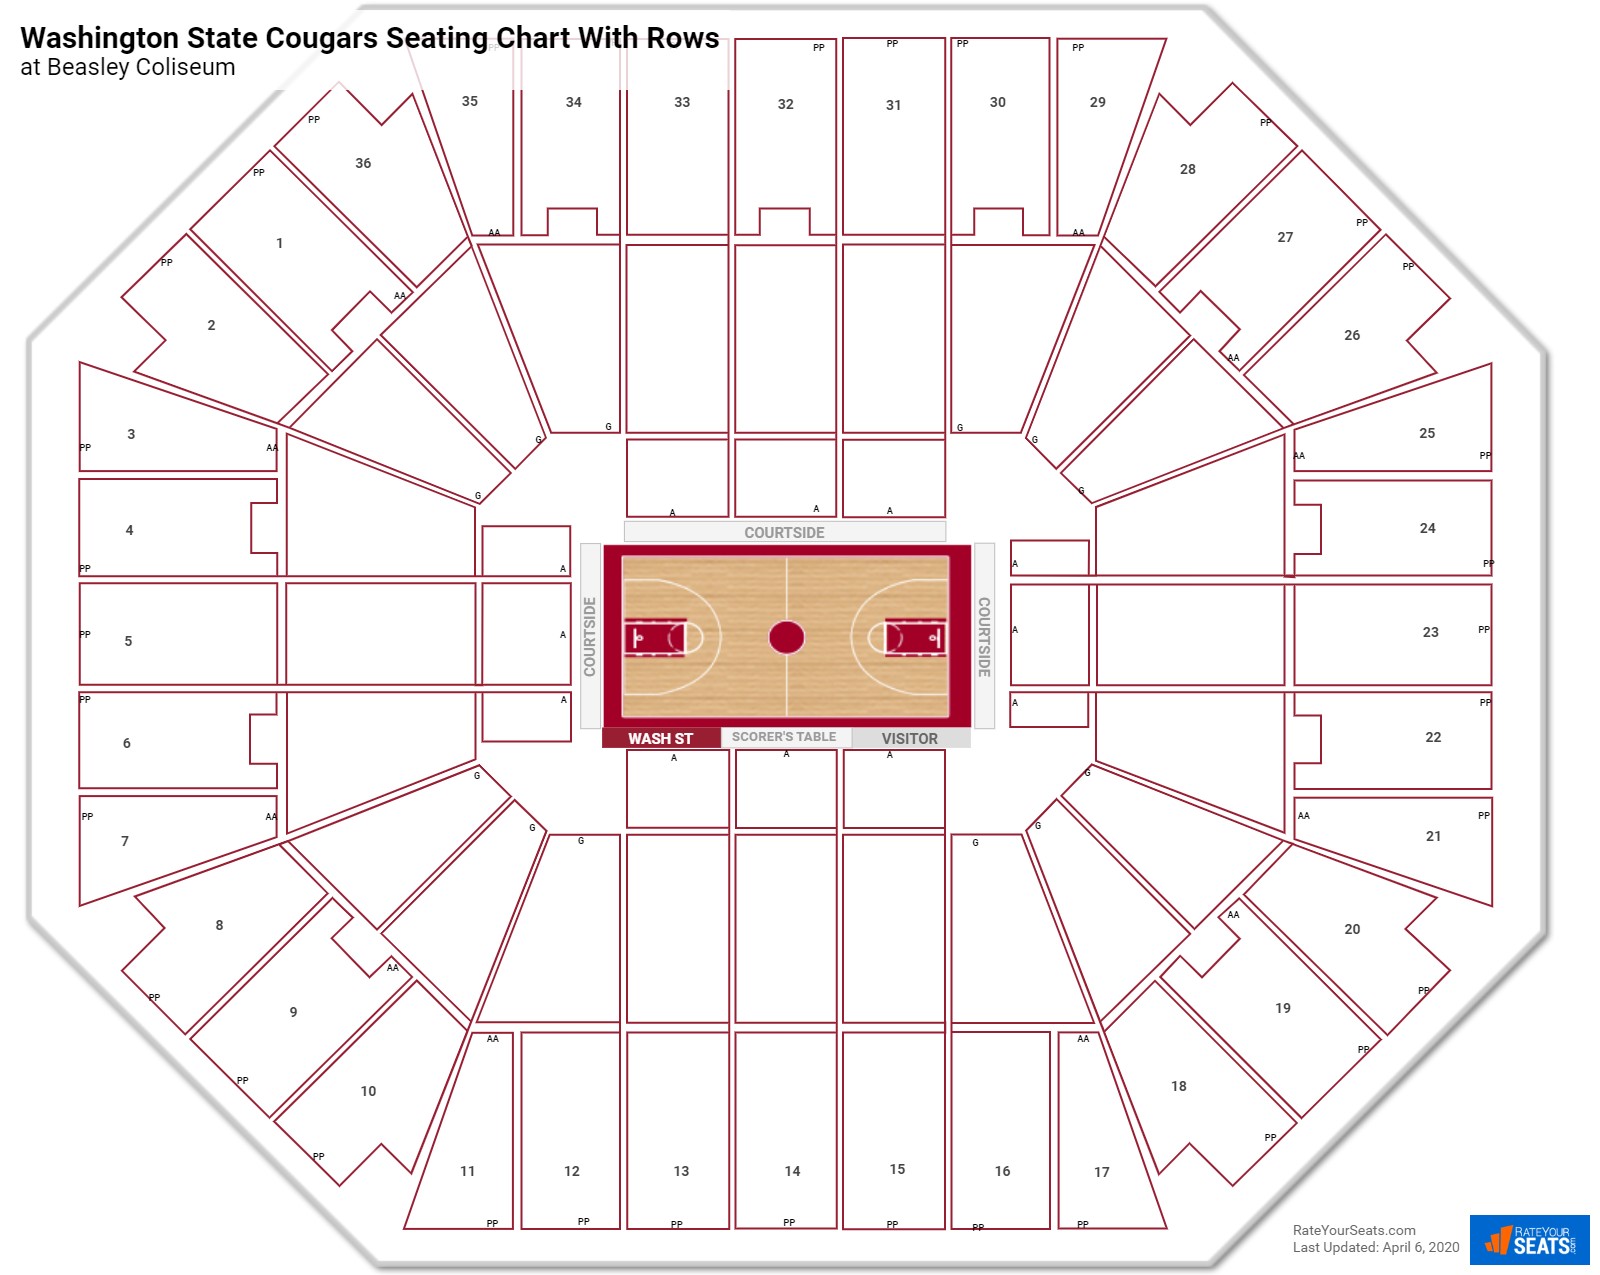 Beasley Coliseum seating chart with row numbers